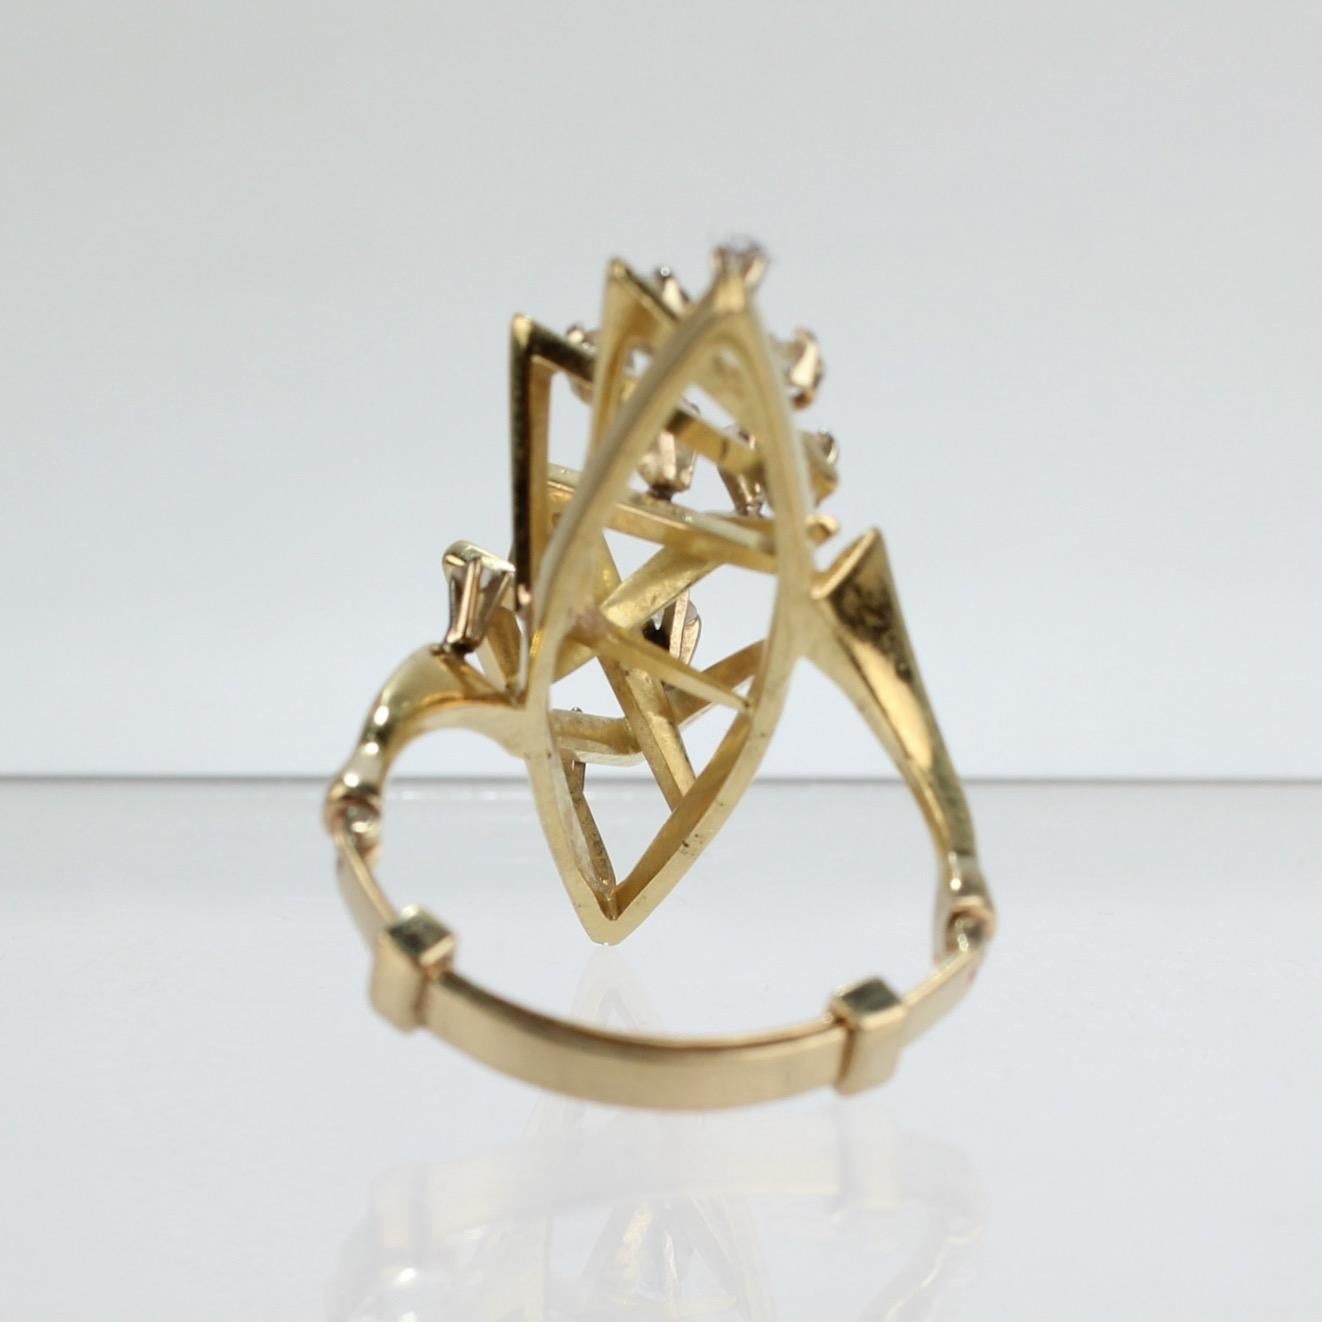 Women's 1960s or 1970s 14 Karat Gold and Diamond Modernist Cocktail Ring